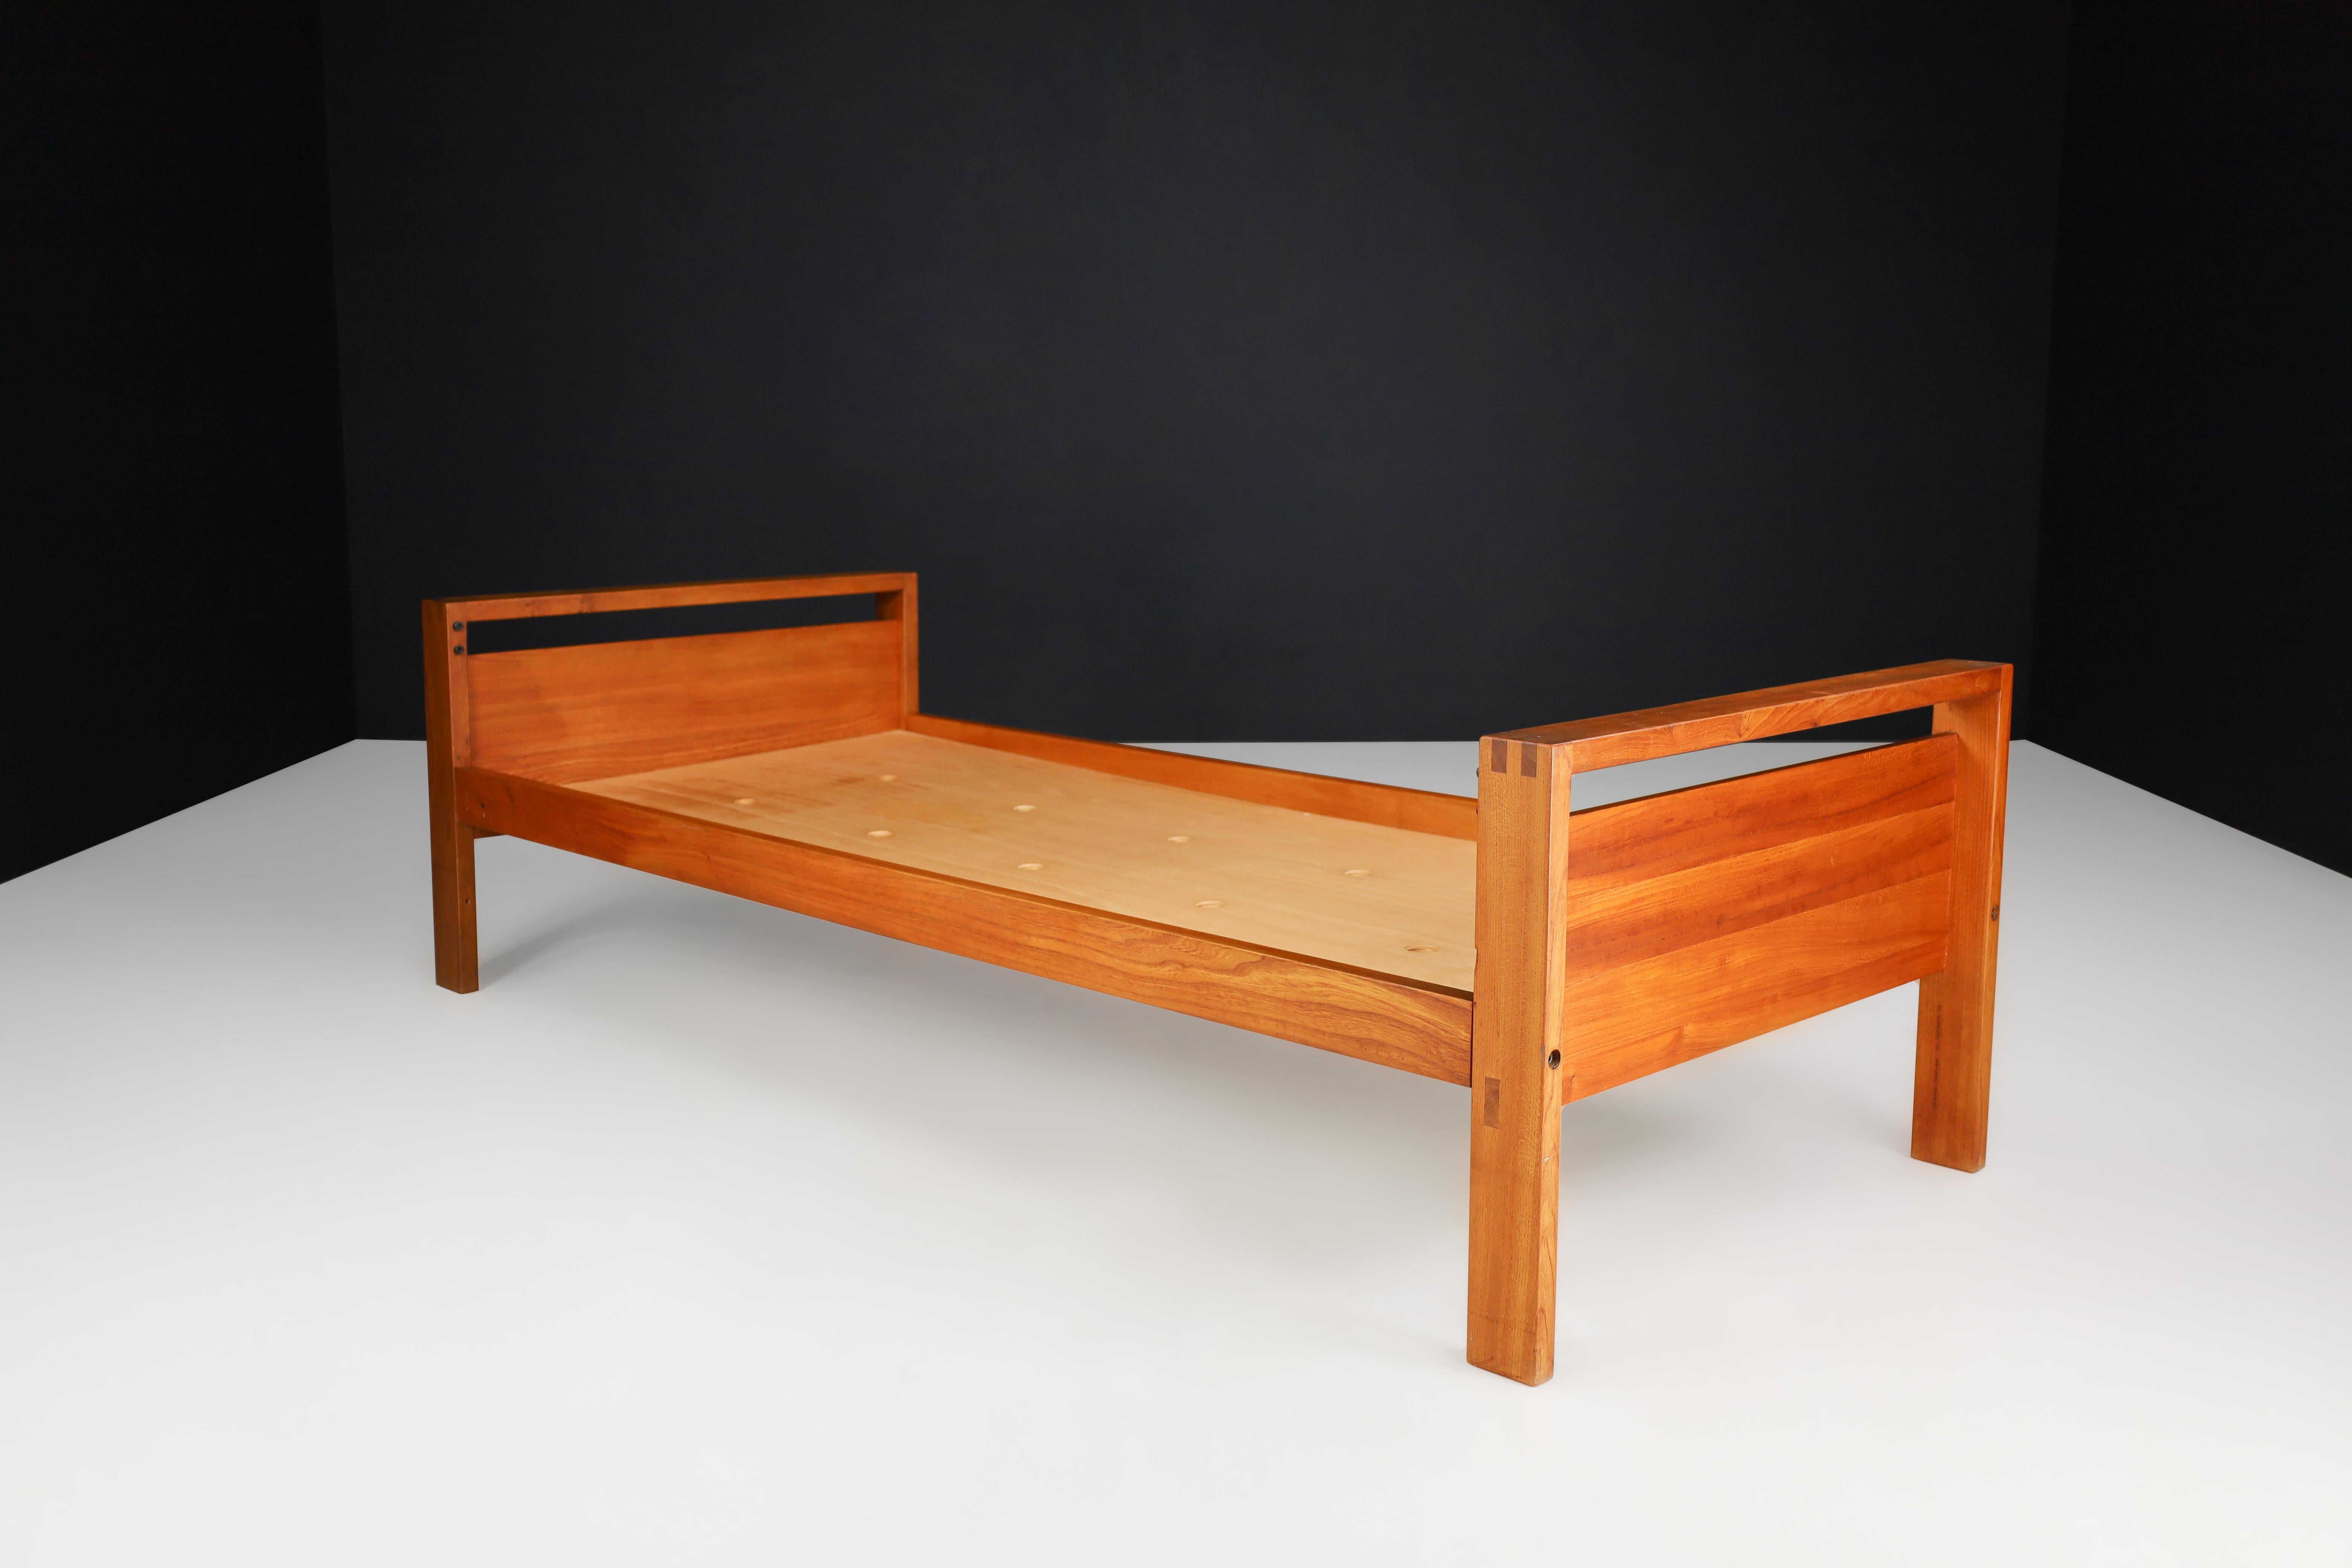 Midcentury Pierre Chapo Lo6a Bed, Daybed in Solid Elm Wood, France, 1960s For Sale 2